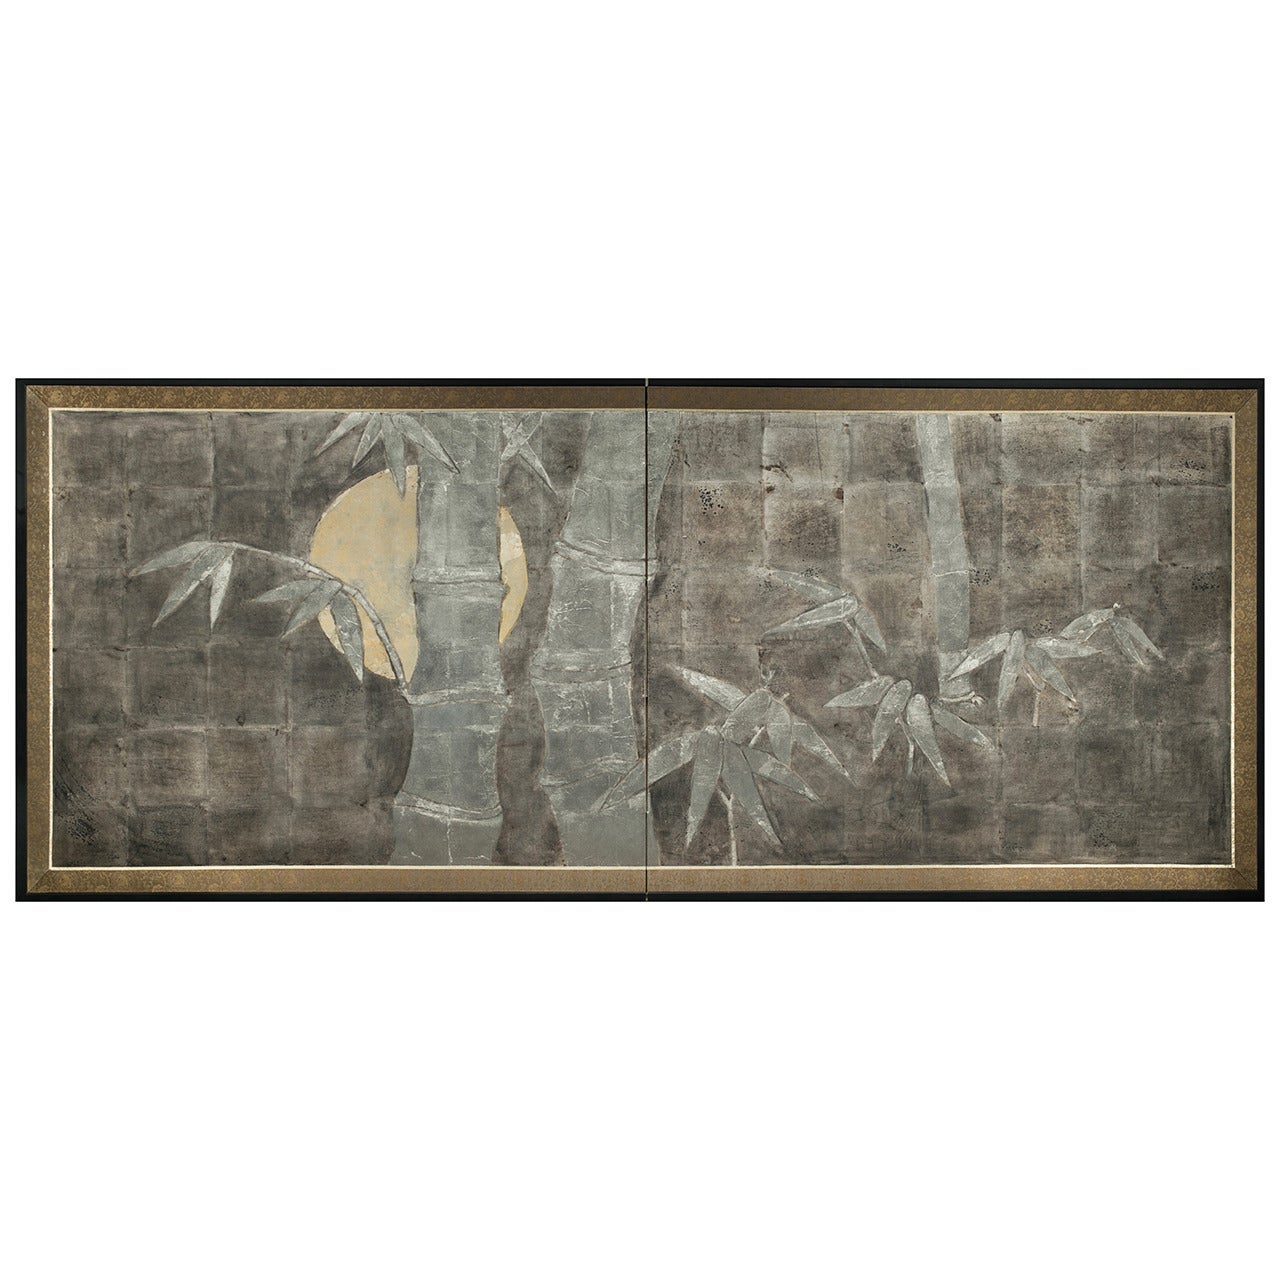 Japanese Screen, "Silver Bamboo on Silver"